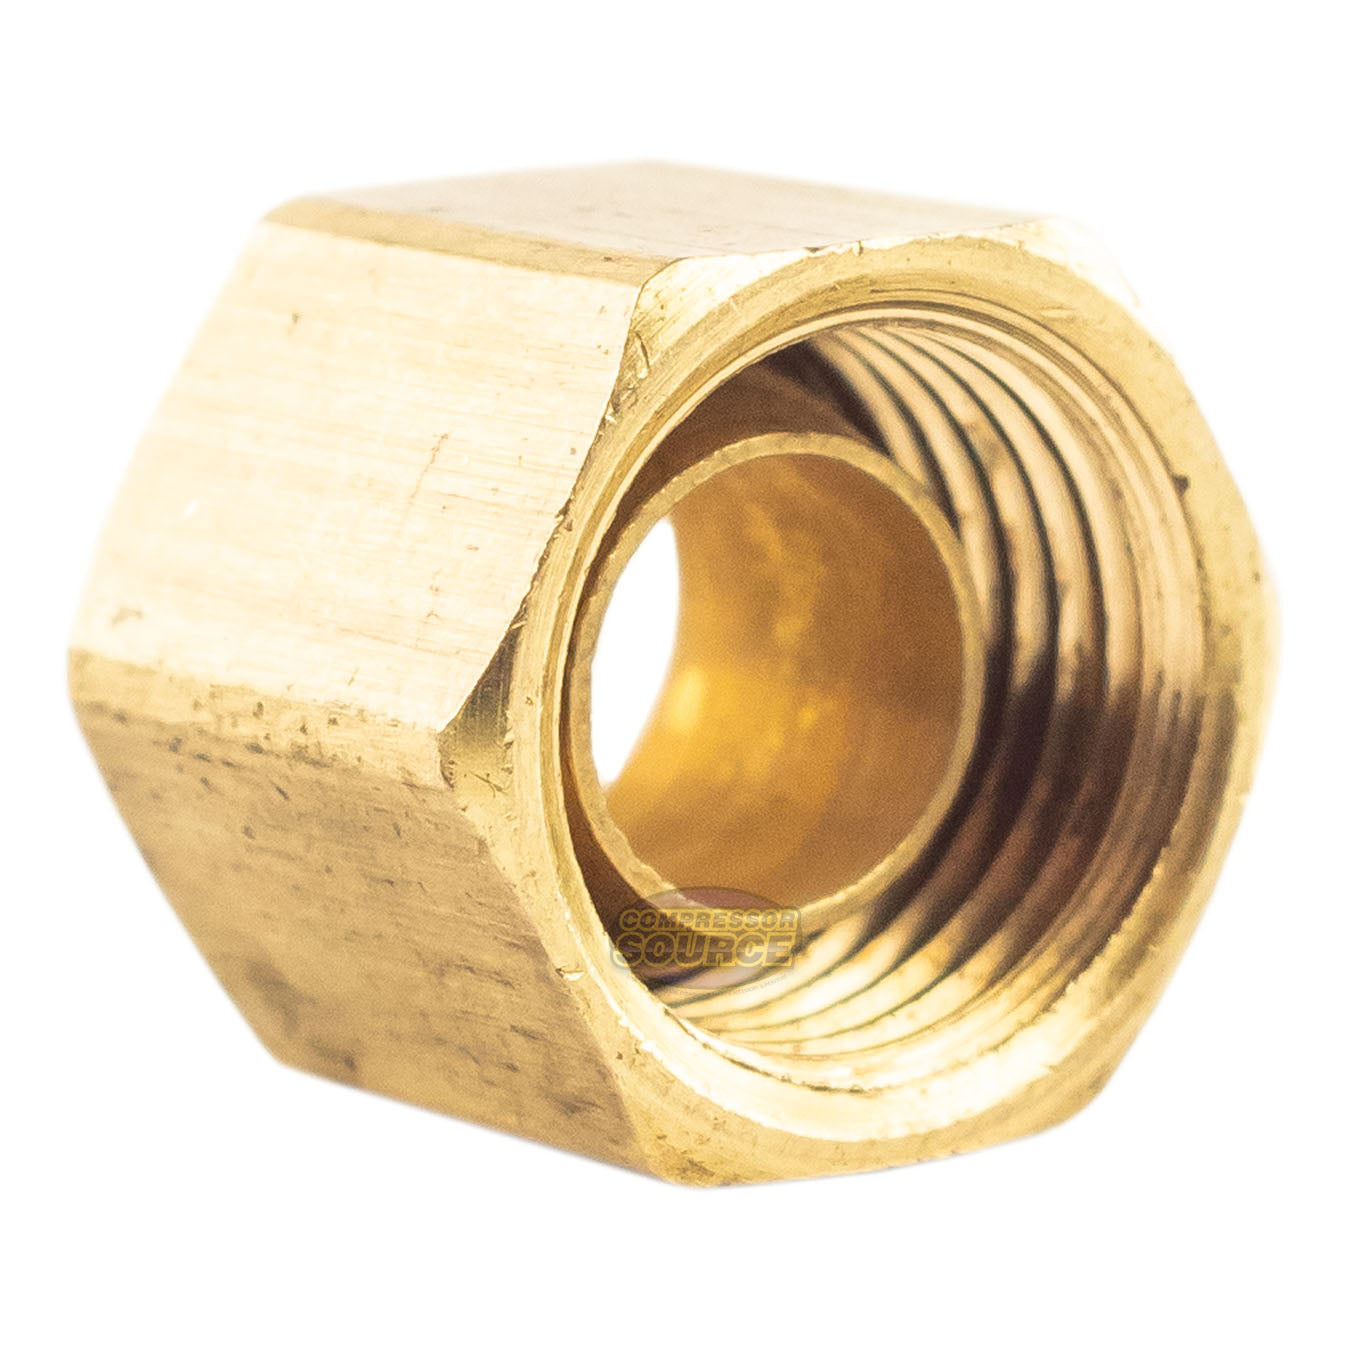 5 Pack 1/4" Compression Nut & Ferrule Combo for 1/4" OD Tube Brass Sleeve Nut